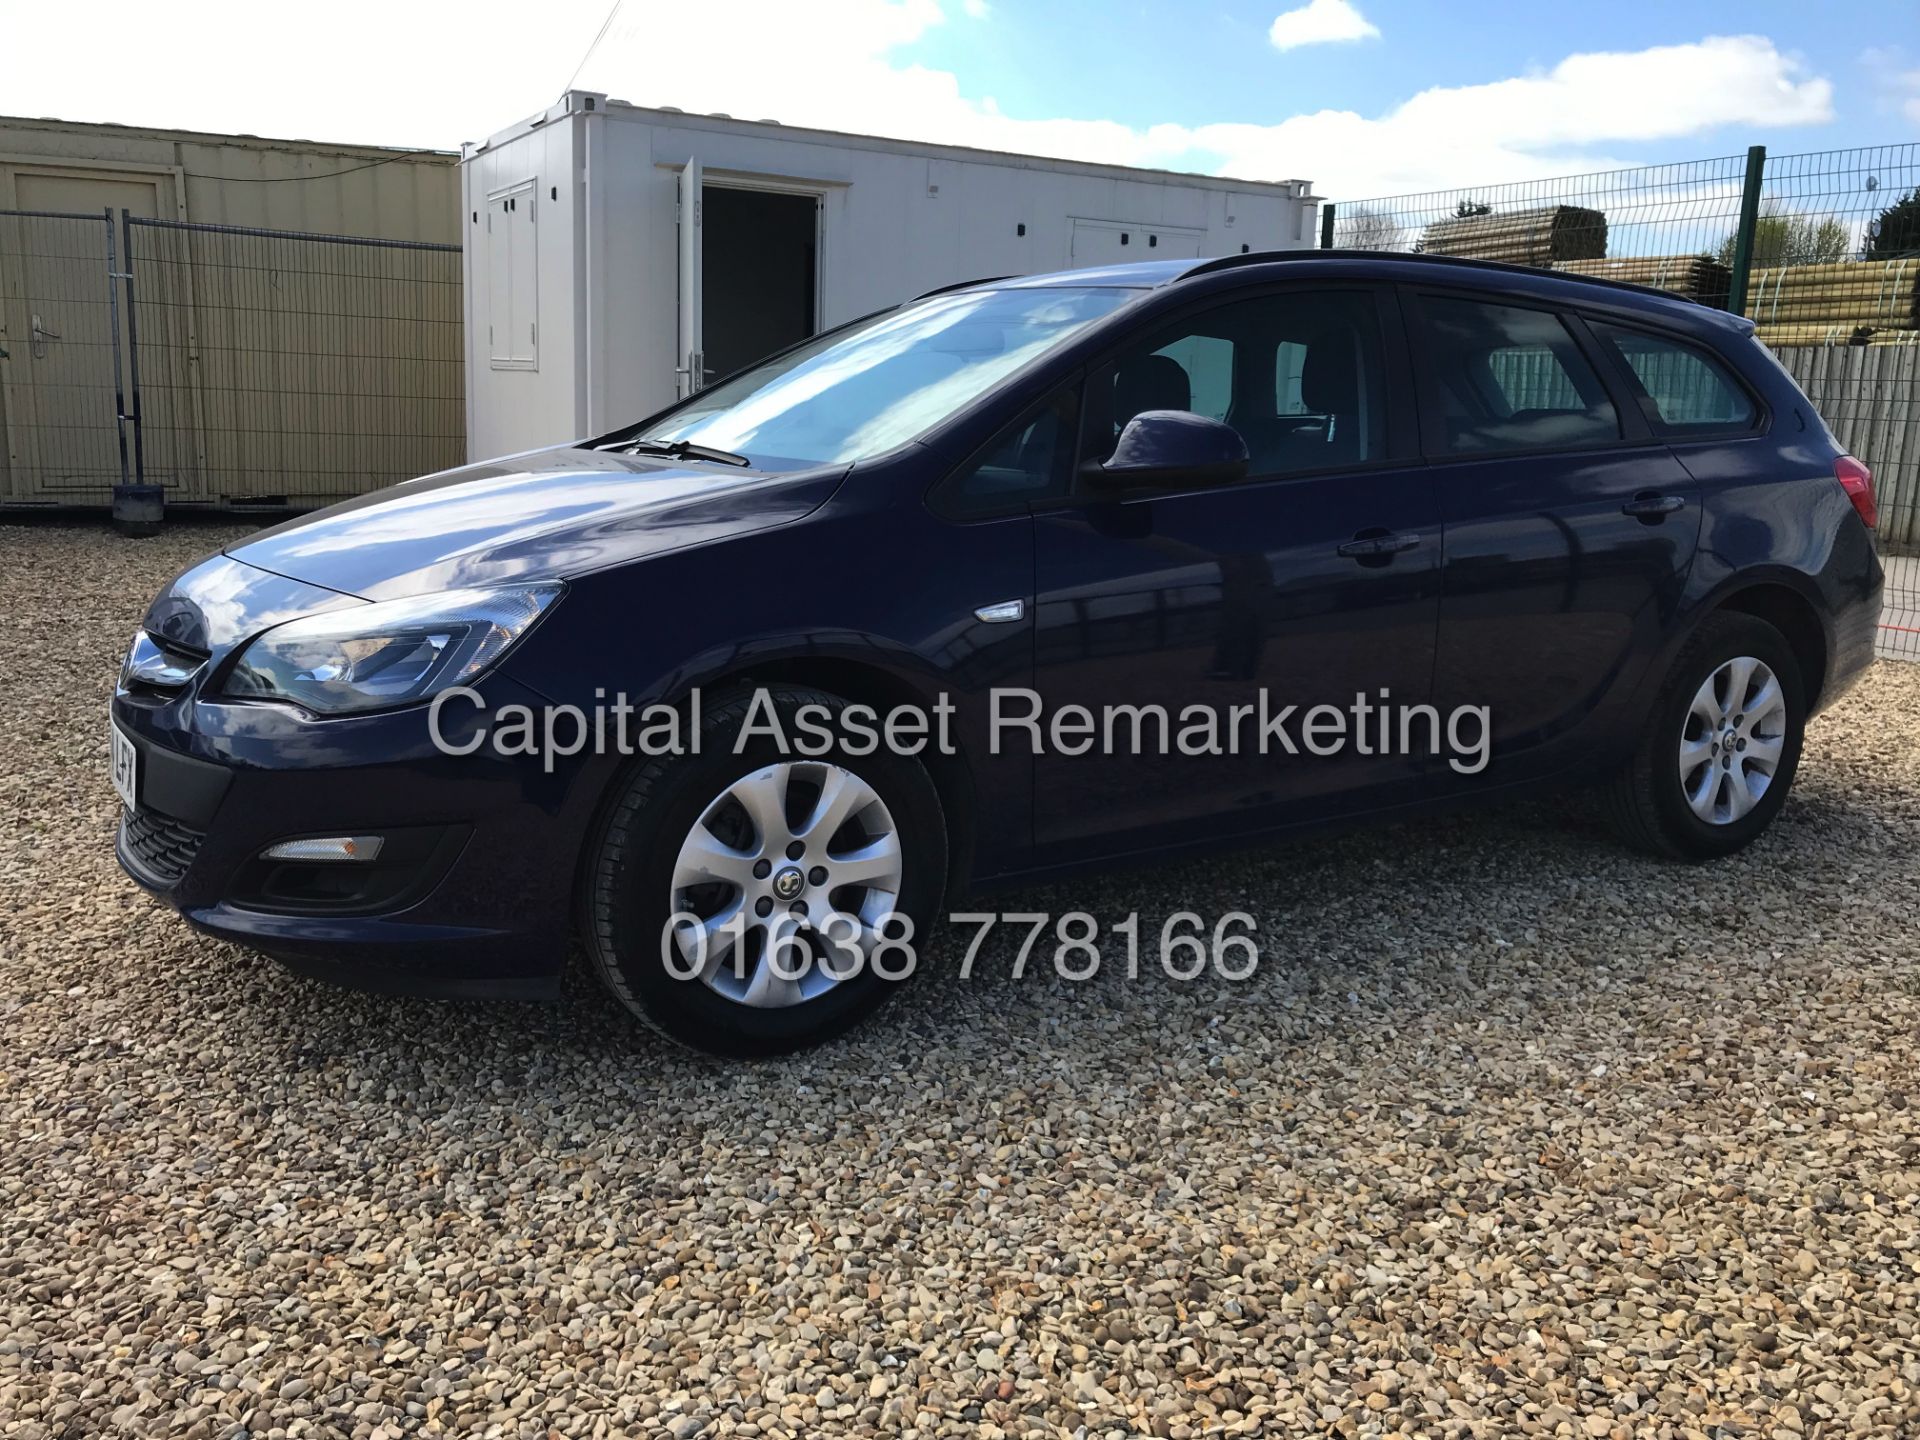 (ON SALE) VAUXHALL ASTRA 1.6CDTI "DESIGN" ESTATE (2015 MODEL) 1 OWNER FSH - AIR CON - CRUISE - Image 2 of 13